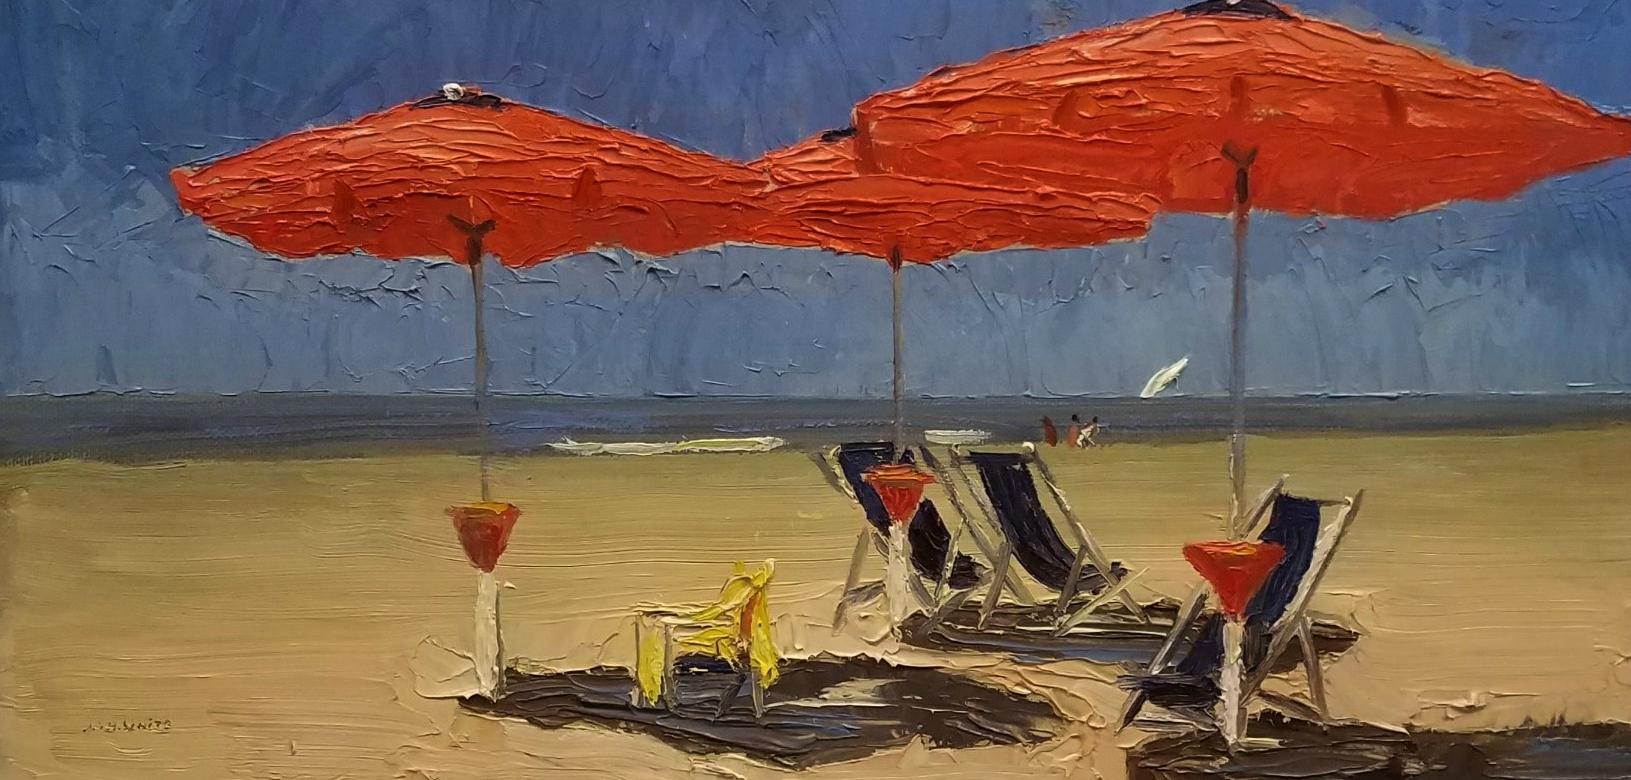 The Red Umbrellas, Italian Beach, Individual Style, Outdoor and Nature  - Painting by Nelson H. White